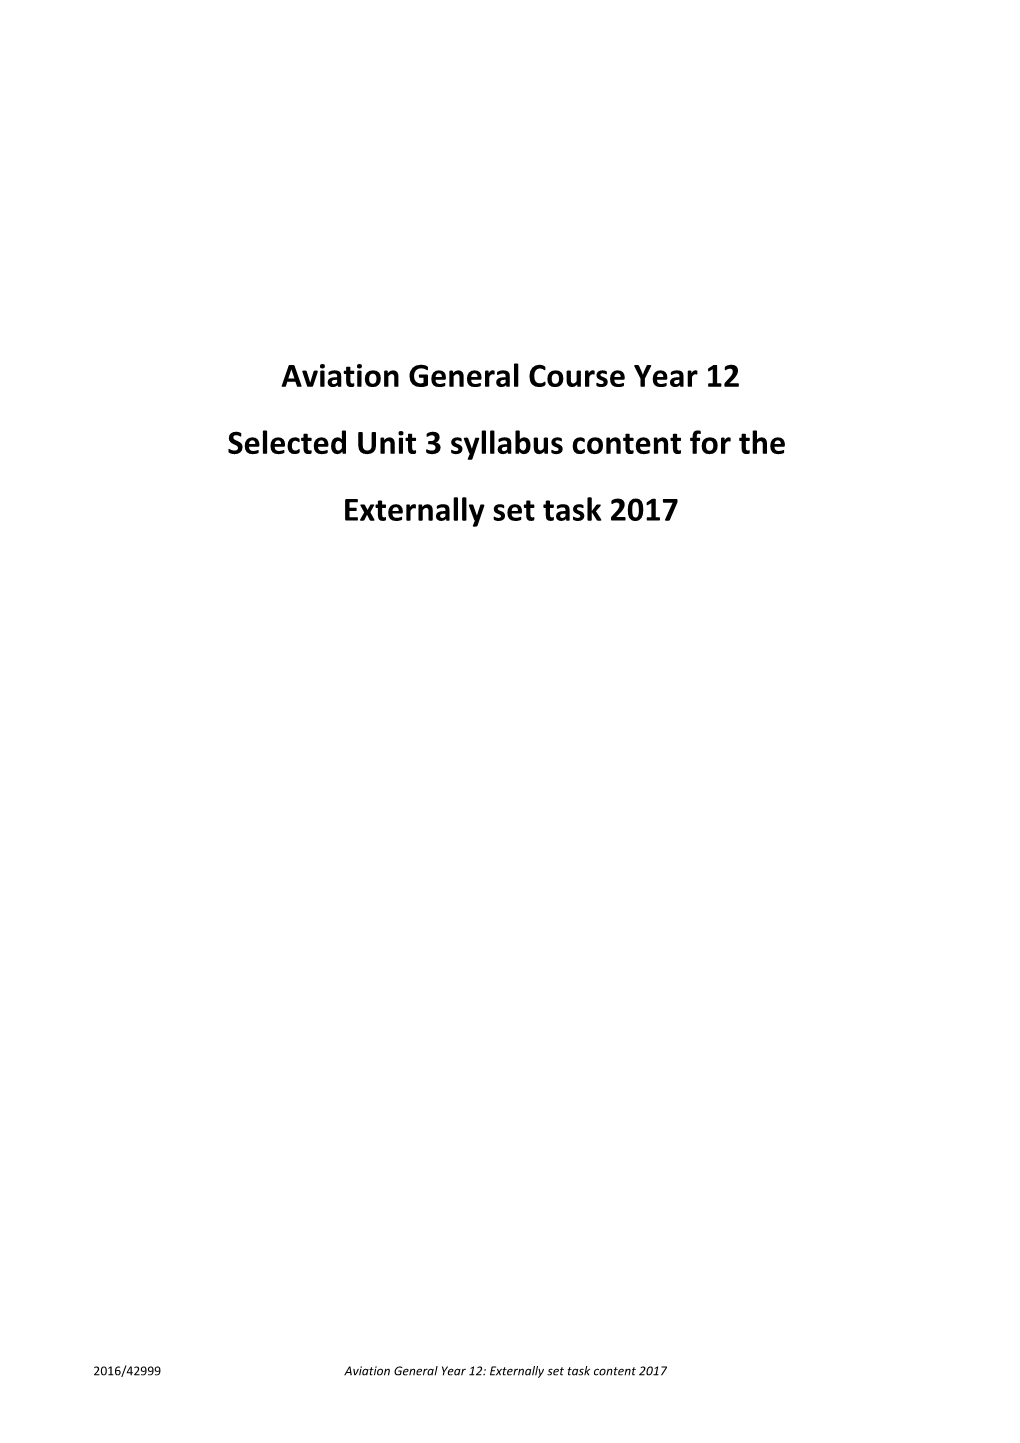 Aviation General Course Year 12